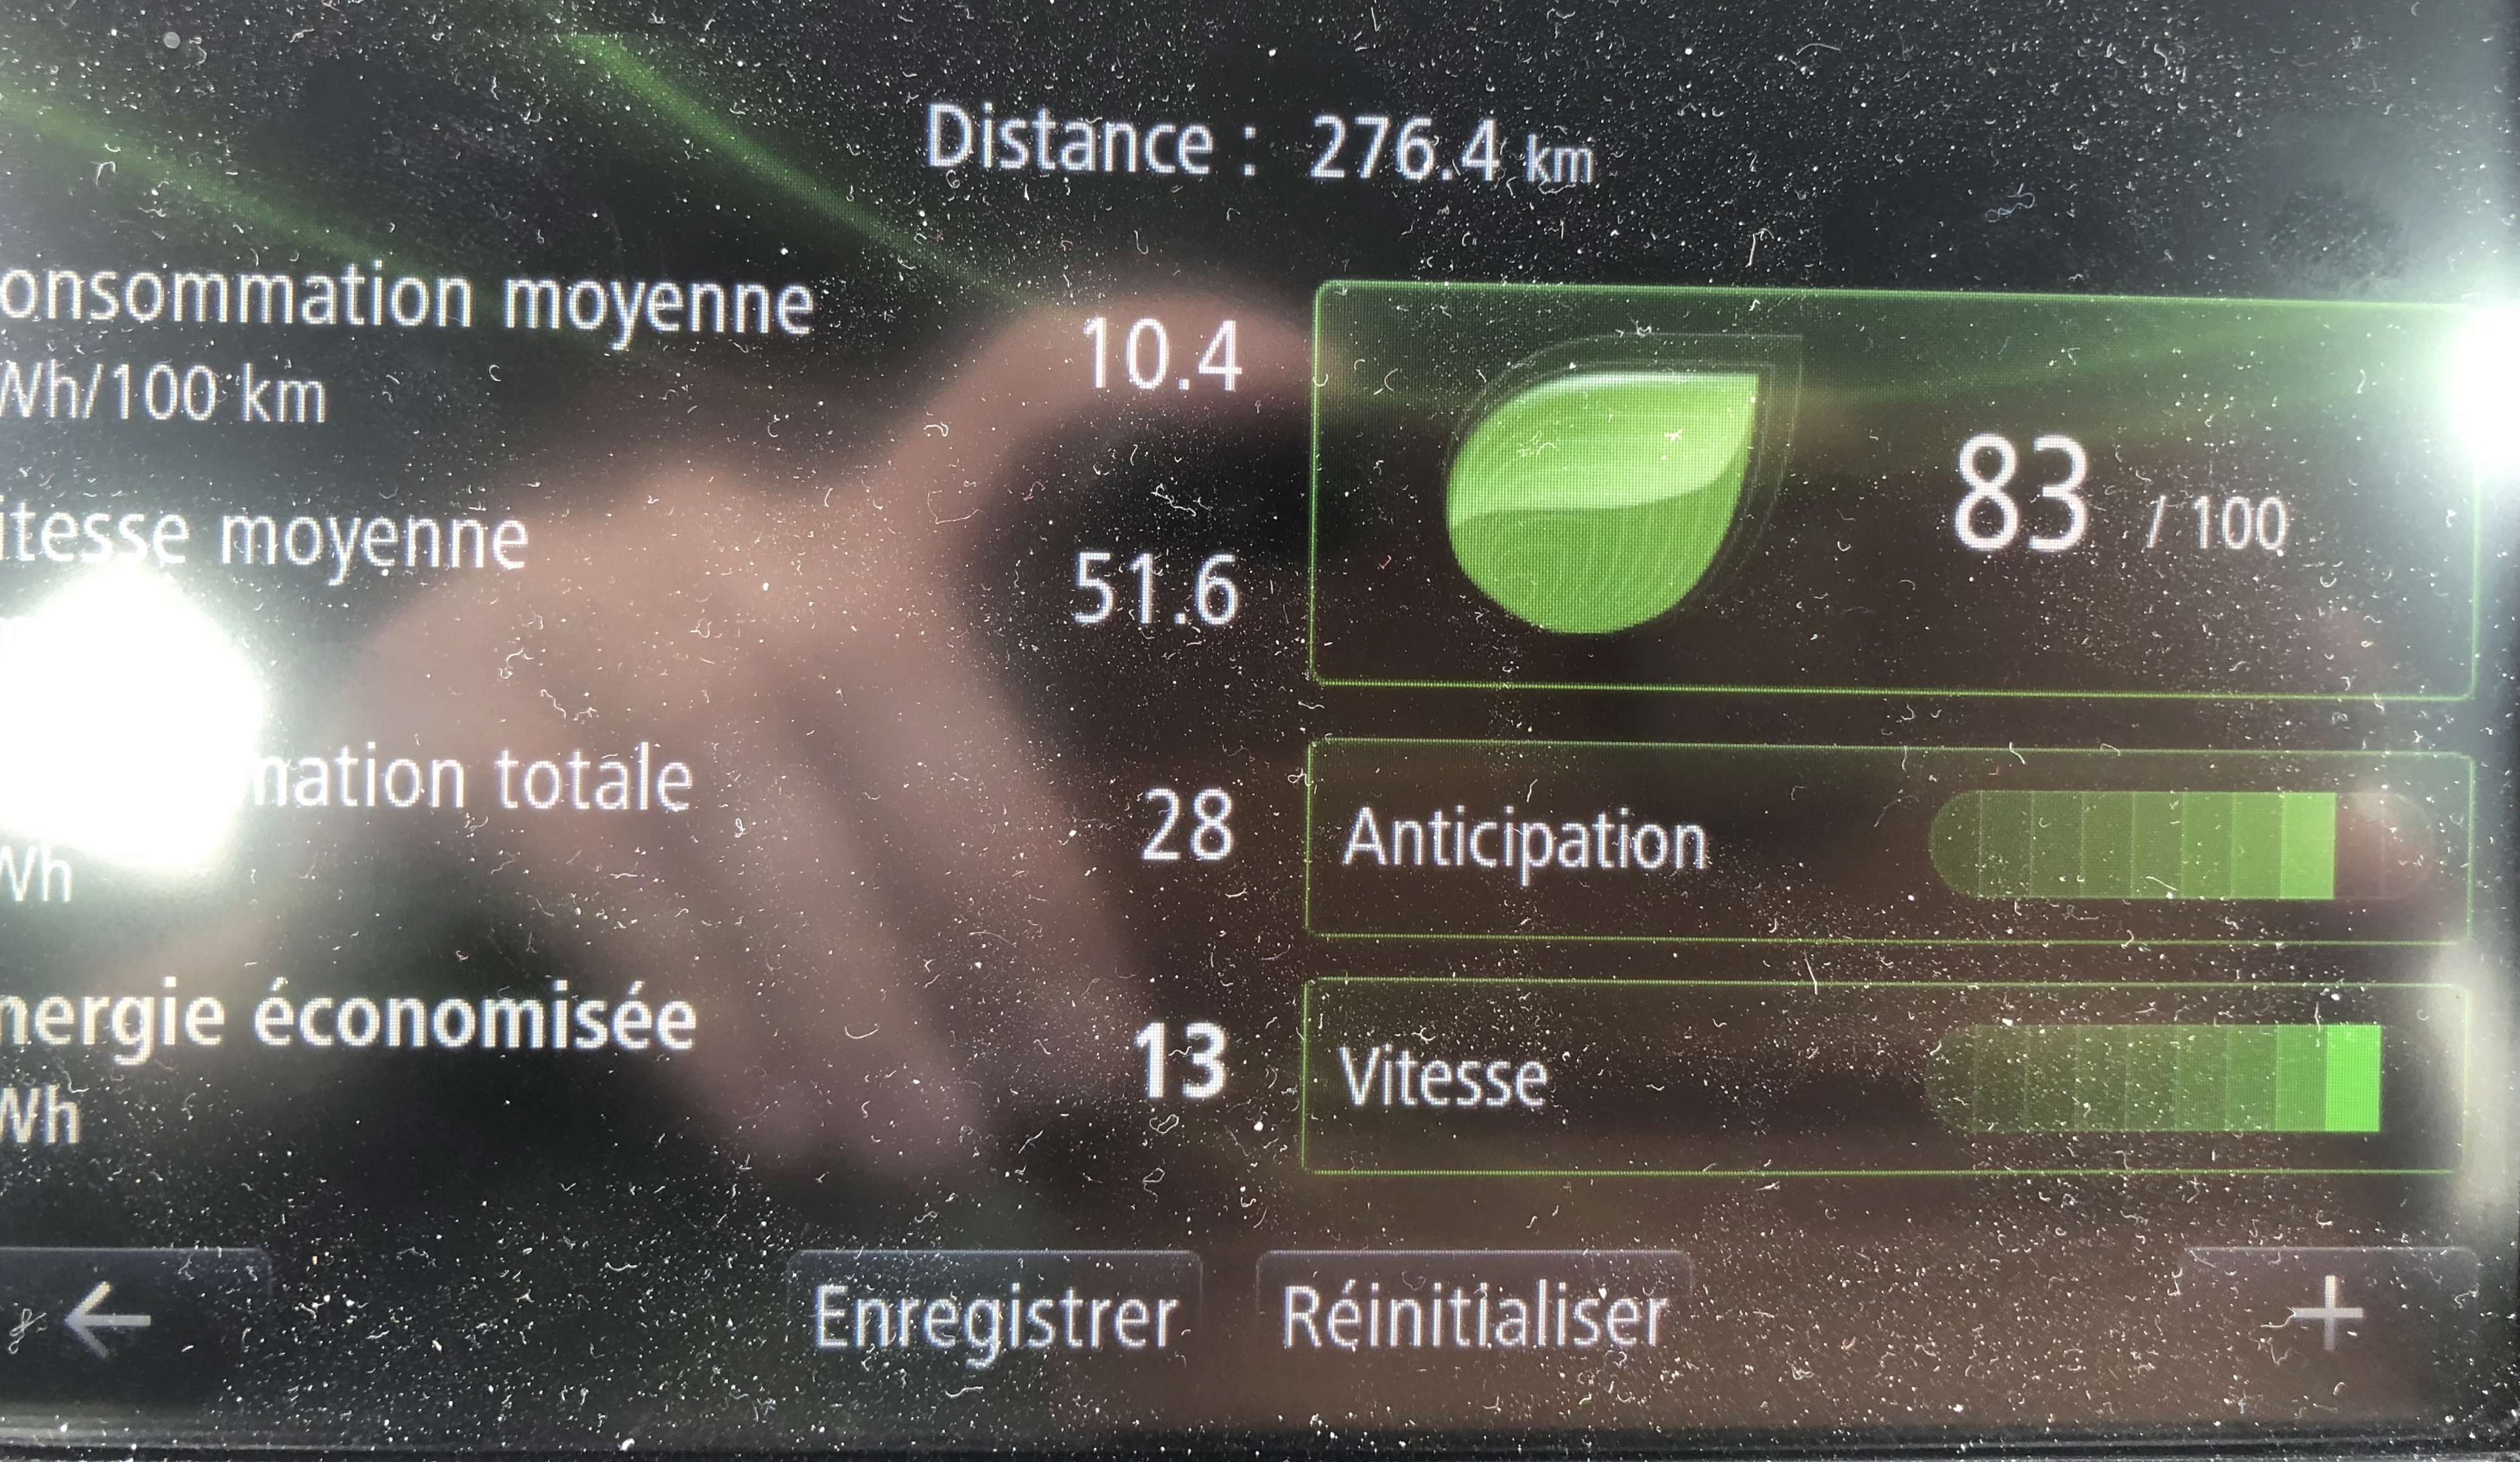 Anomalie consommation kWh Renault ZOE Intens 2015 - Page 2 6292db10